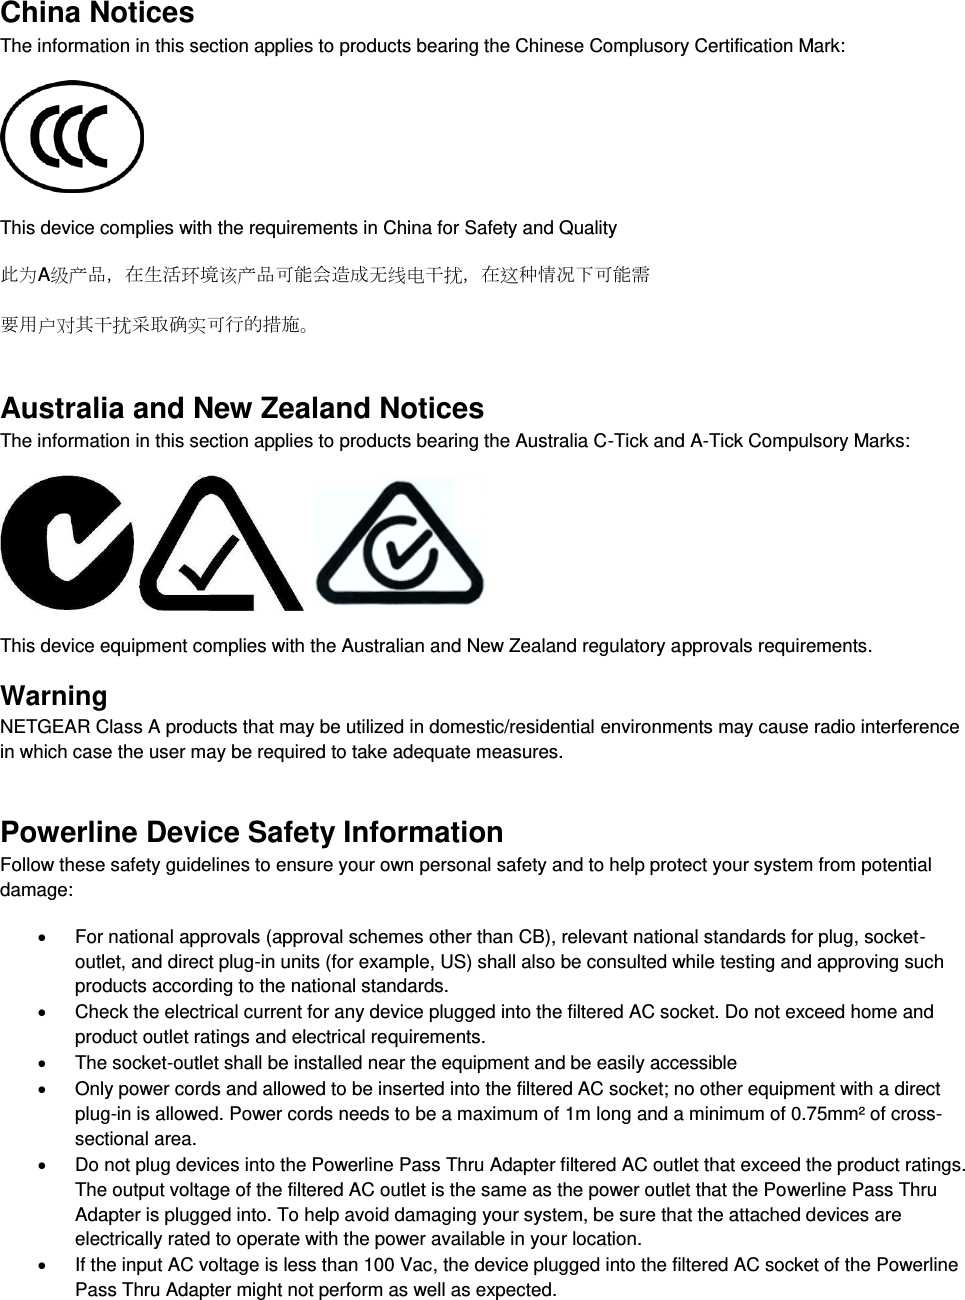  China Notices The information in this section applies to products bearing the Chinese Complusory Certification Mark:  This device complies with the requirements in China for Safety and Quality 此为A级产品，在生活环境该产品可能会造成无线电干扰，在这种情况下可能需 要用户对其干扰采取确实可行的措施。 Australia and New Zealand Notices The information in this section applies to products bearing the Australia C-Tick and A-Tick Compulsory Marks:      This device equipment complies with the Australian and New Zealand regulatory approvals requirements. Warning NETGEAR Class A products that may be utilized in domestic/residential environments may cause radio interference in which case the user may be required to take adequate measures.  Powerline Device Safety Information Follow these safety guidelines to ensure your own personal safety and to help protect your system from potential damage:   For national approvals (approval schemes other than CB), relevant national standards for plug, socket-outlet, and direct plug-in units (for example, US) shall also be consulted while testing and approving such products according to the national standards.    Check the electrical current for any device plugged into the filtered AC socket. Do not exceed home and product outlet ratings and electrical requirements.   The socket-outlet shall be installed near the equipment and be easily accessible   Only power cords and allowed to be inserted into the filtered AC socket; no other equipment with a direct plug-in is allowed. Power cords needs to be a maximum of 1m long and a minimum of 0.75mm² of cross-sectional area.   Do not plug devices into the Powerline Pass Thru Adapter filtered AC outlet that exceed the product ratings.  The output voltage of the filtered AC outlet is the same as the power outlet that the Powerline Pass Thru Adapter is plugged into. To help avoid damaging your system, be sure that the attached devices are electrically rated to operate with the power available in your location.   If the input AC voltage is less than 100 Vac, the device plugged into the filtered AC socket of the Powerline Pass Thru Adapter might not perform as well as expected. 